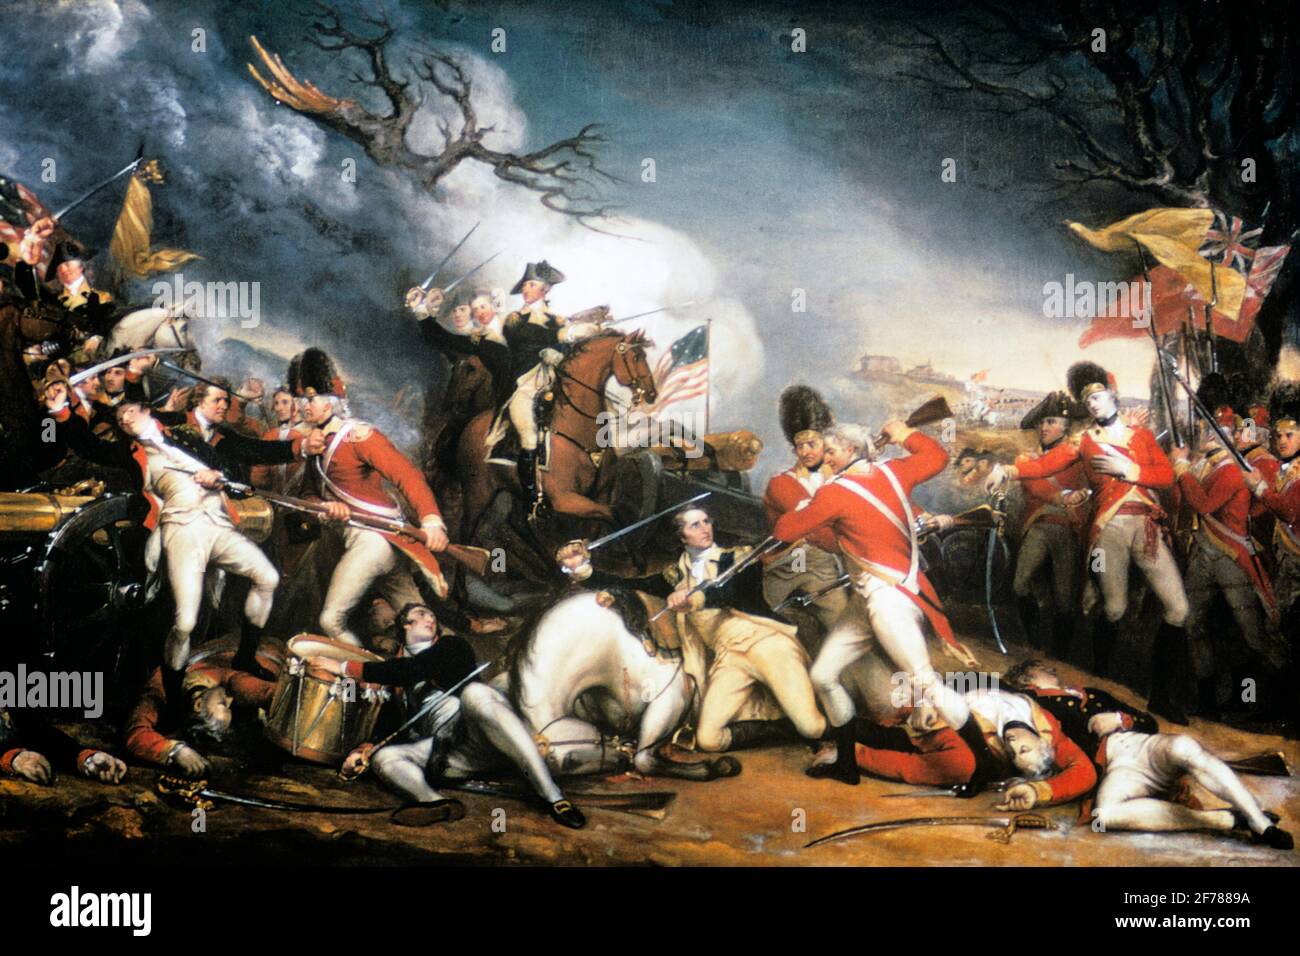 1700s 1770s DEATH GENERAL MERCER BATTLE PRINCETON NJ JANUARY 12 1777 AMERICA REVOLUTIONARY WAR PAINTING BY JOHN TRUMBULL - ka3749 HAR001 HARS 1777 COLONIES WEAPONS 1700s HAR001 OLD FASHIONED Stock Photo